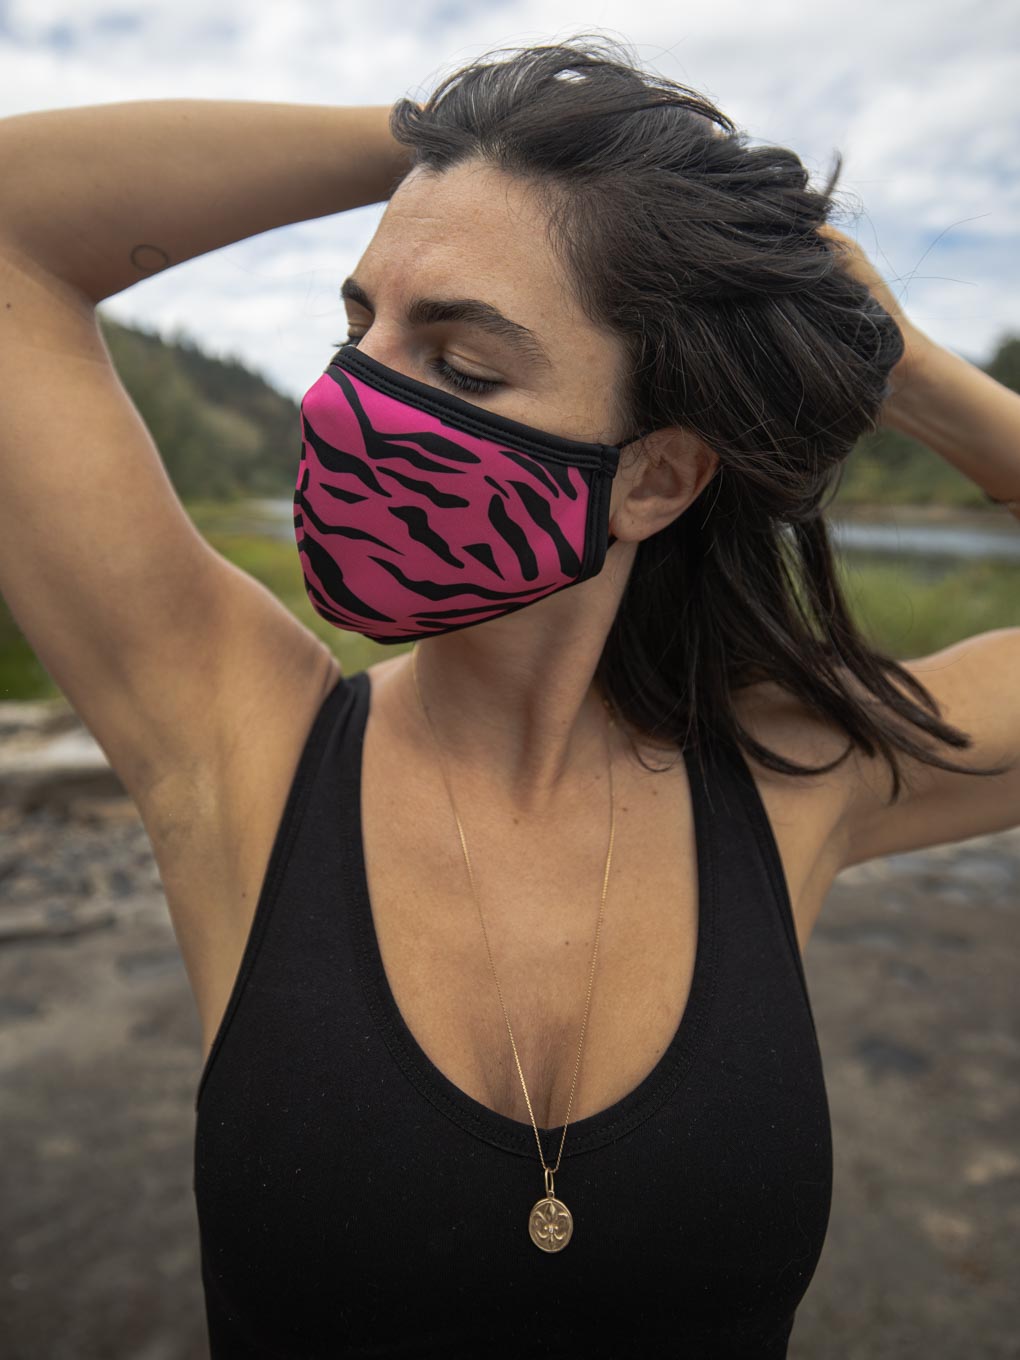 Zebra Copper-Threaded Face Mask in Neon Pink on Woman